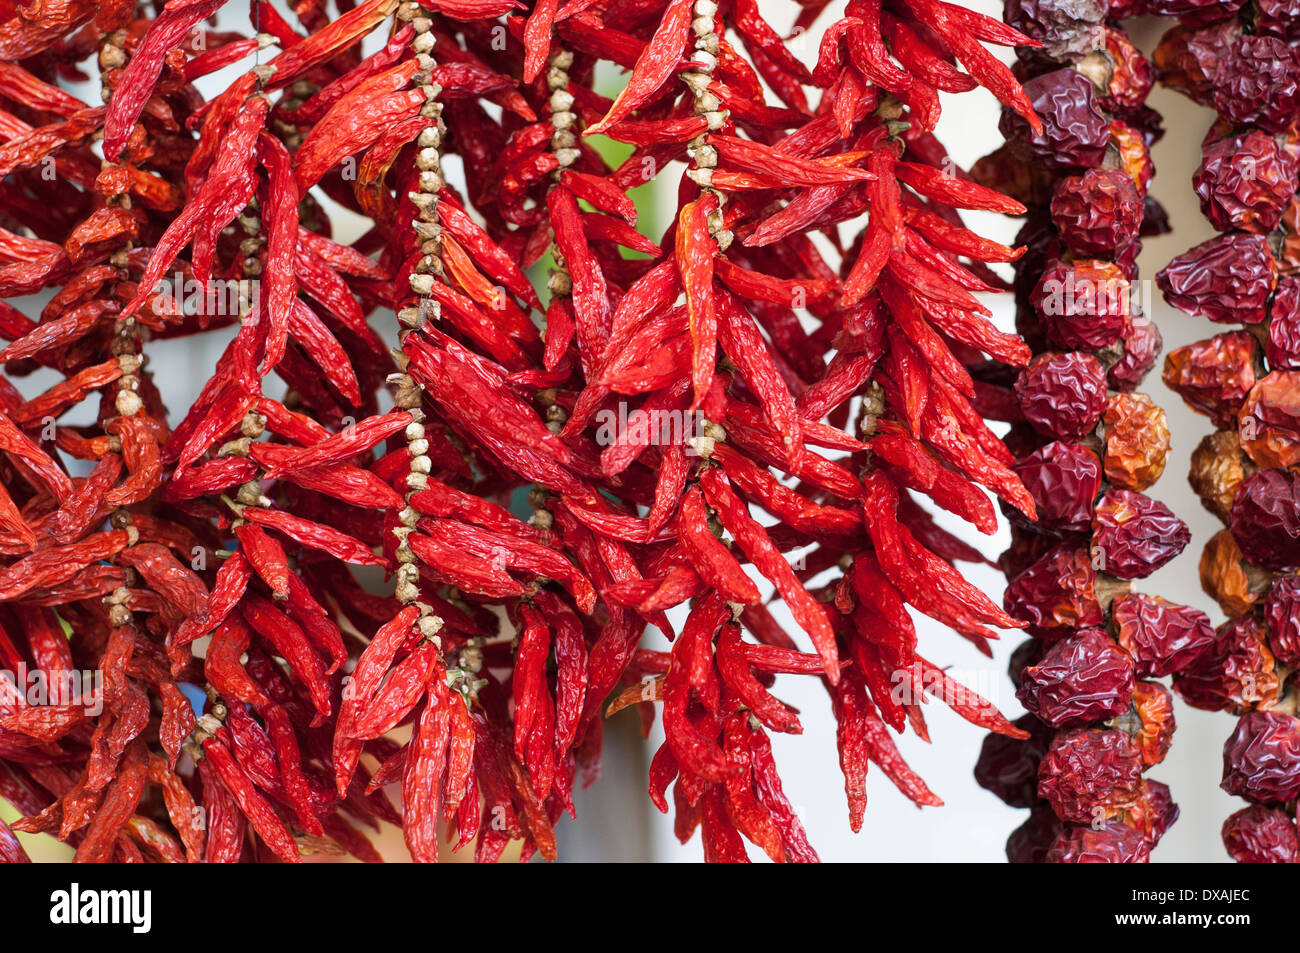 Chilli pepper, Capsicum annuum, strings of chilies hung up to dry Stock  Photo - Alamy